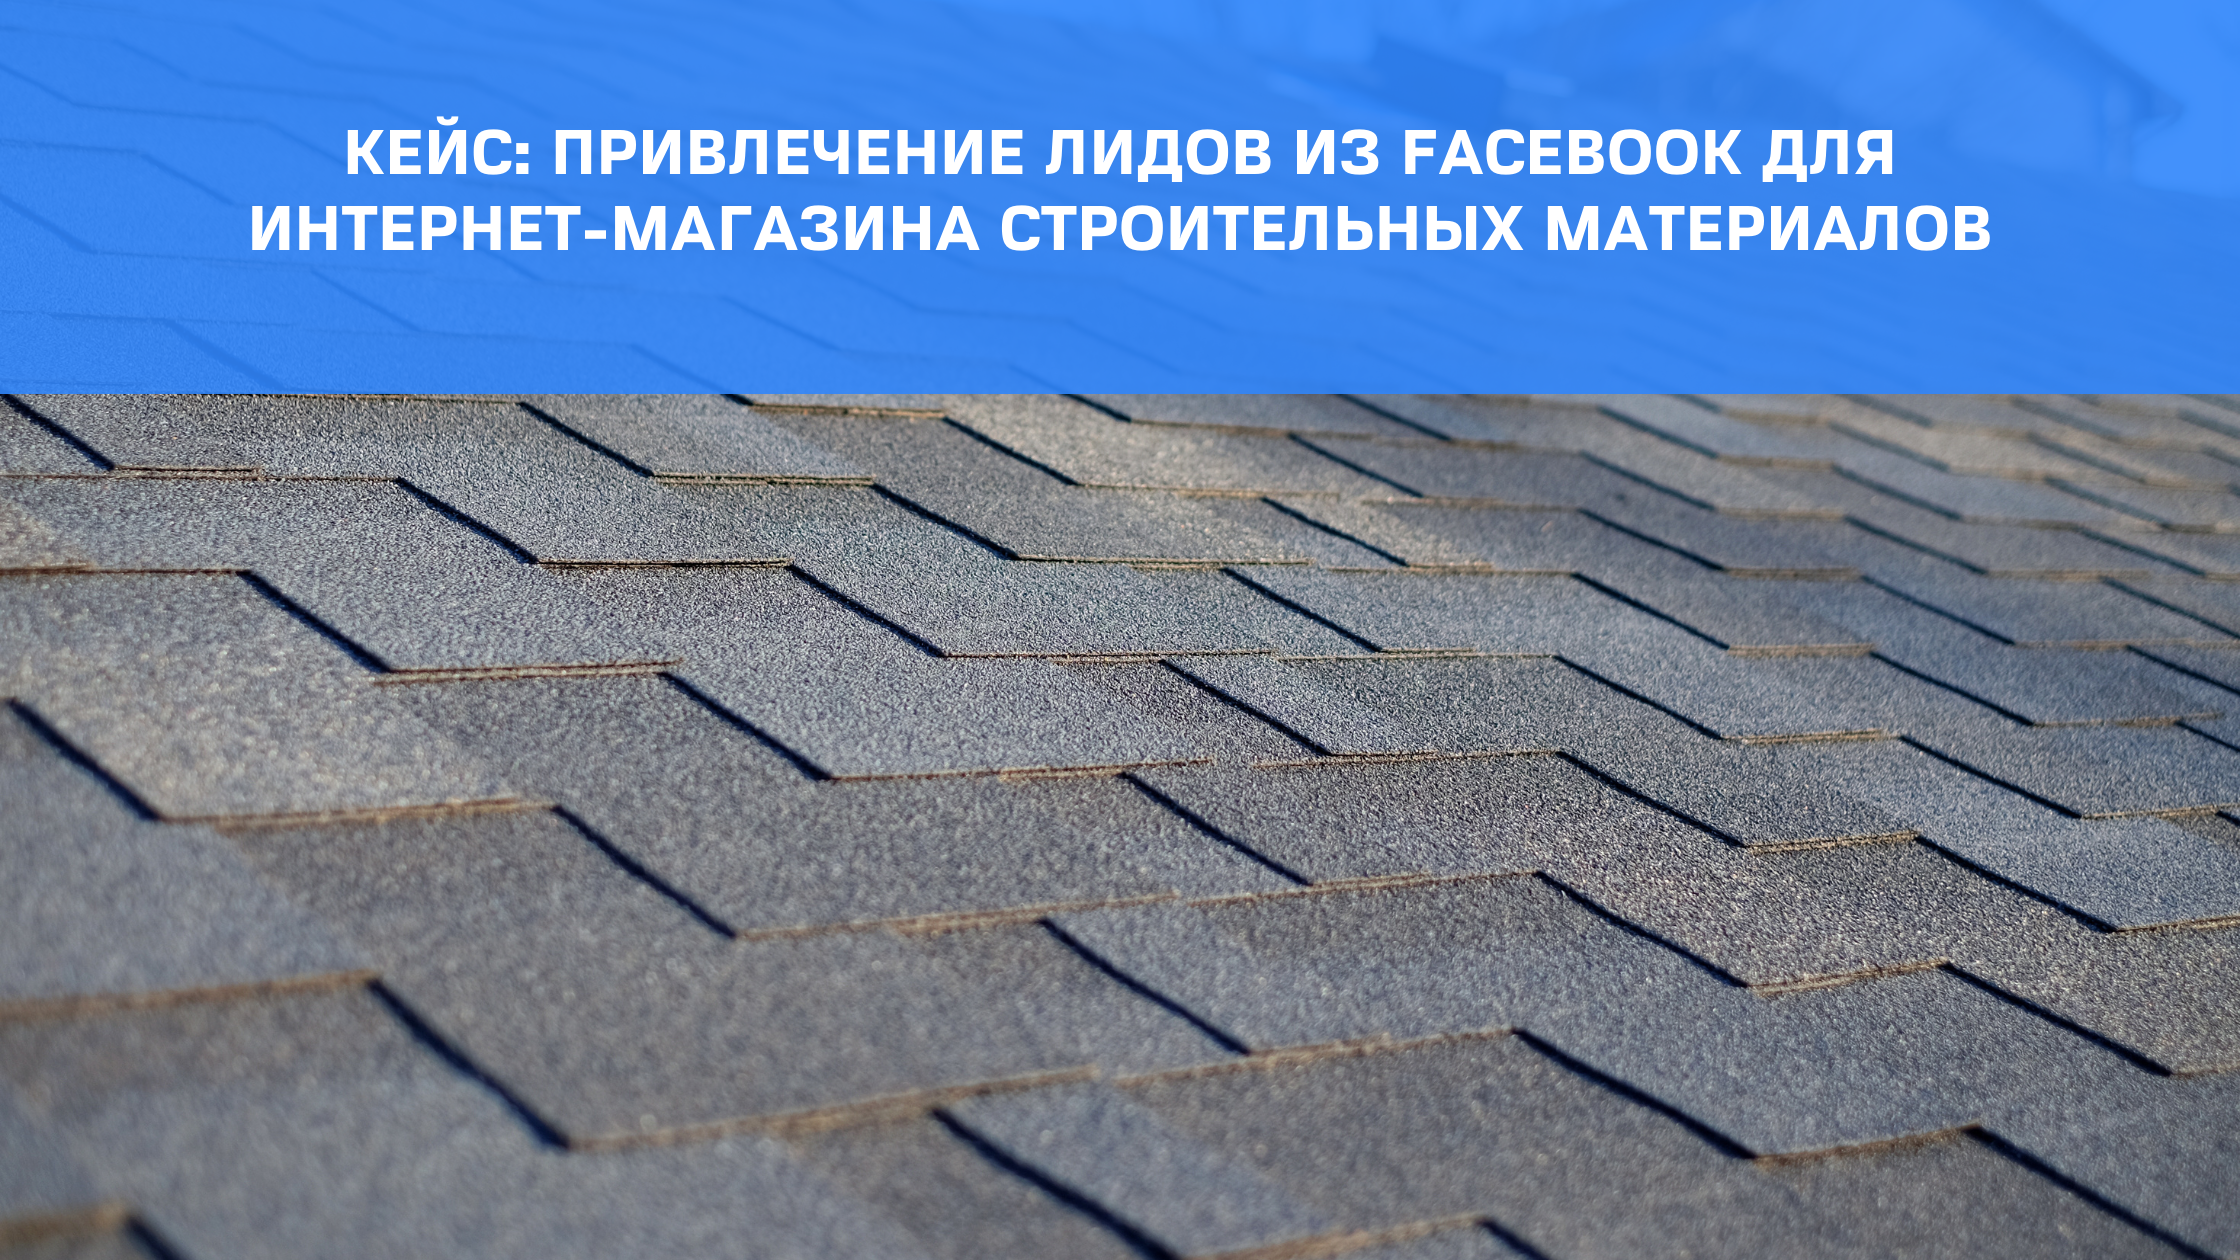 Case: attracting leads from Facebook for an online store of building materials